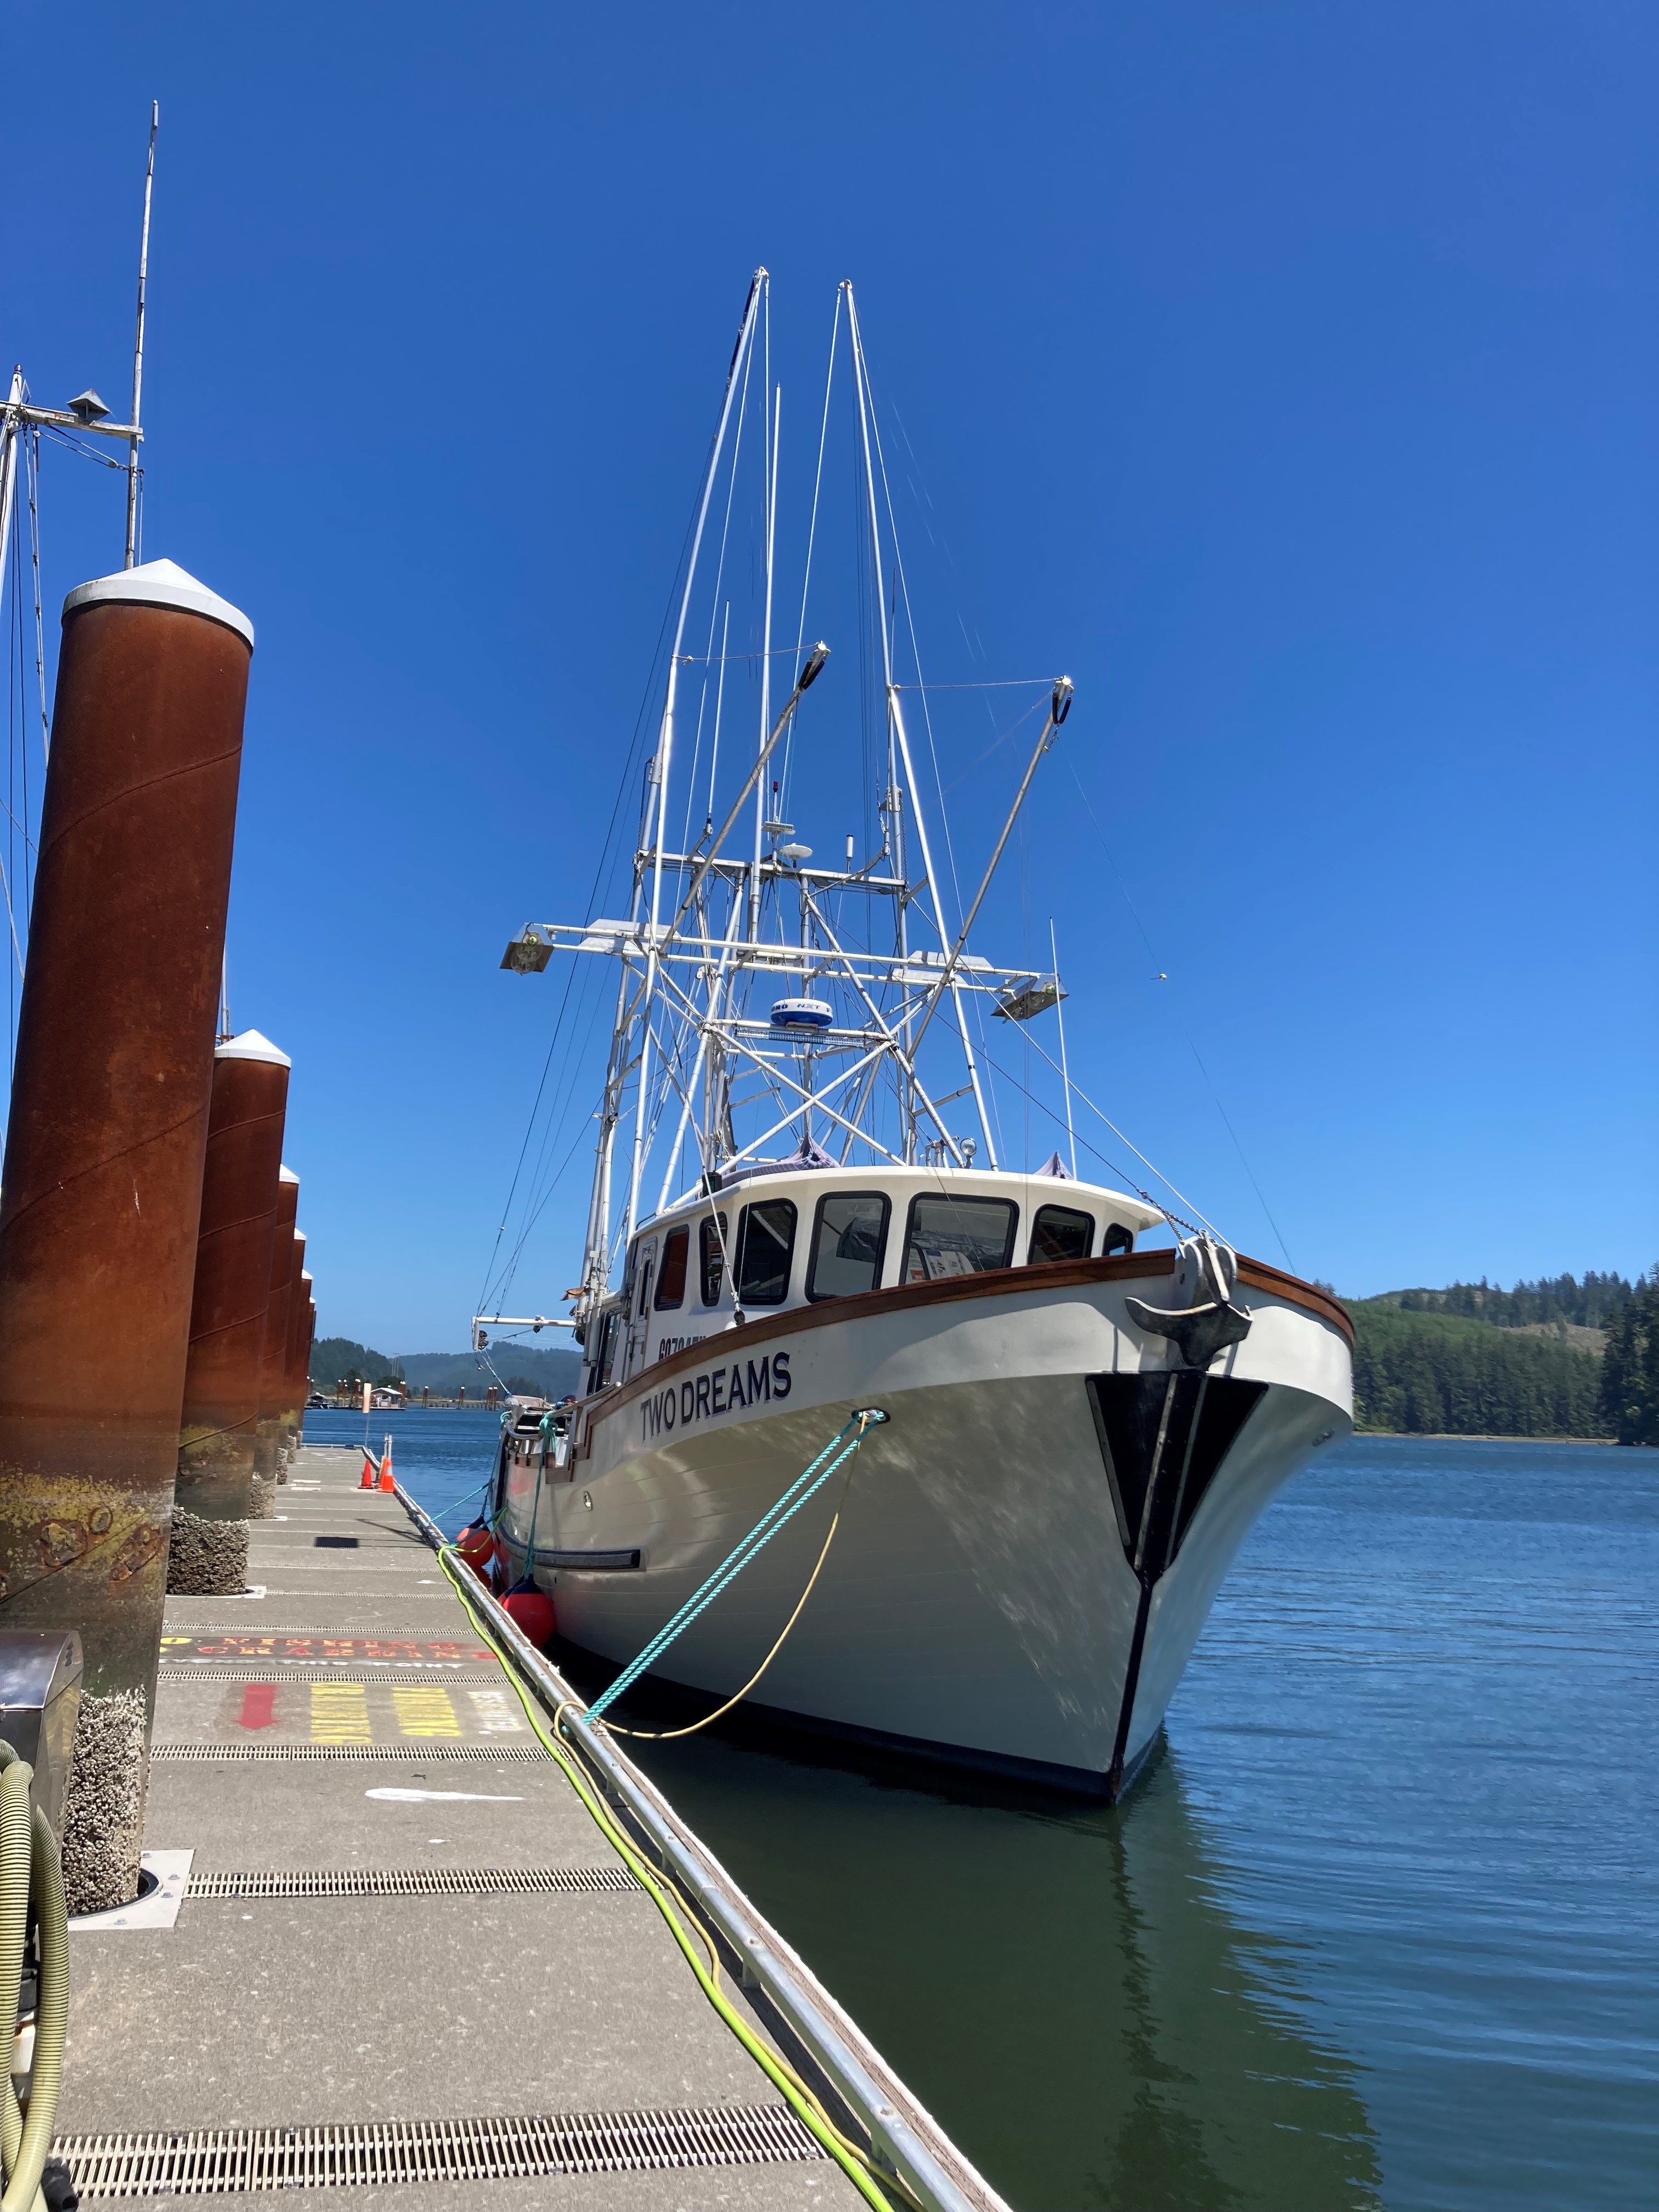 Large enclosed cabin boat tied up on the long dock at the Port of Siuslaw